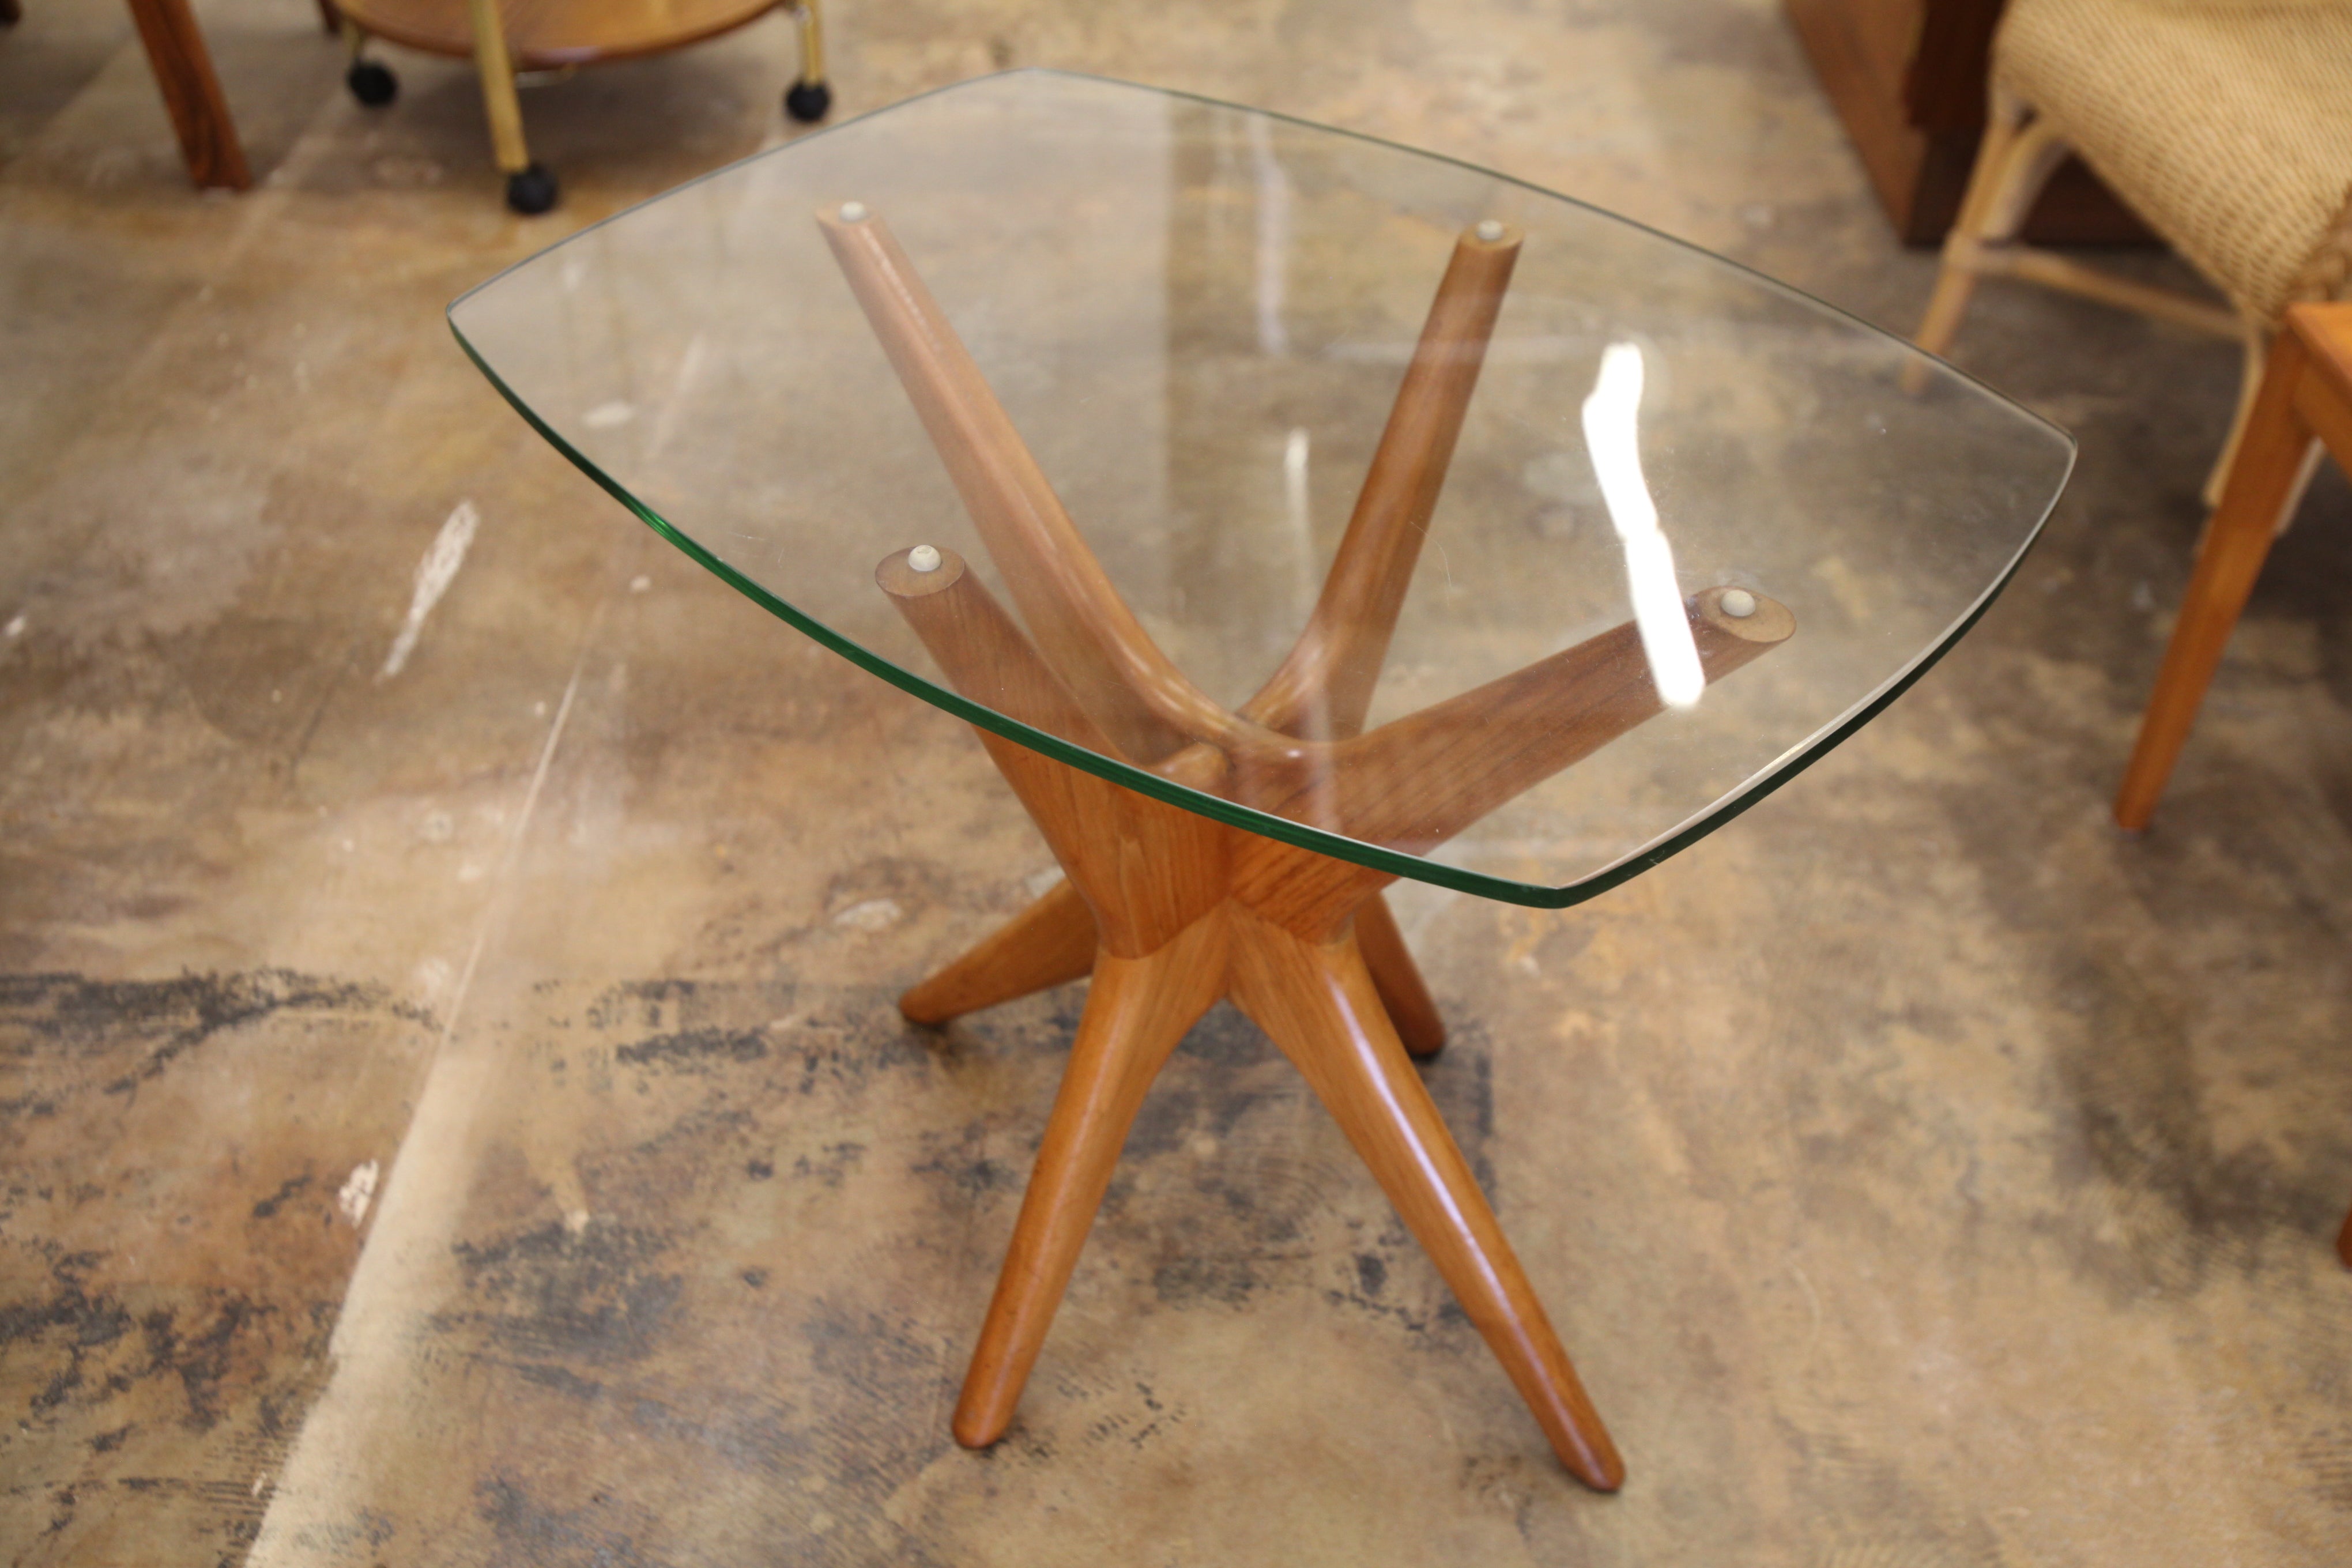 Vintage Adrian Pearsall Style Glass Top Side Table (25" x 19" x 22"H)